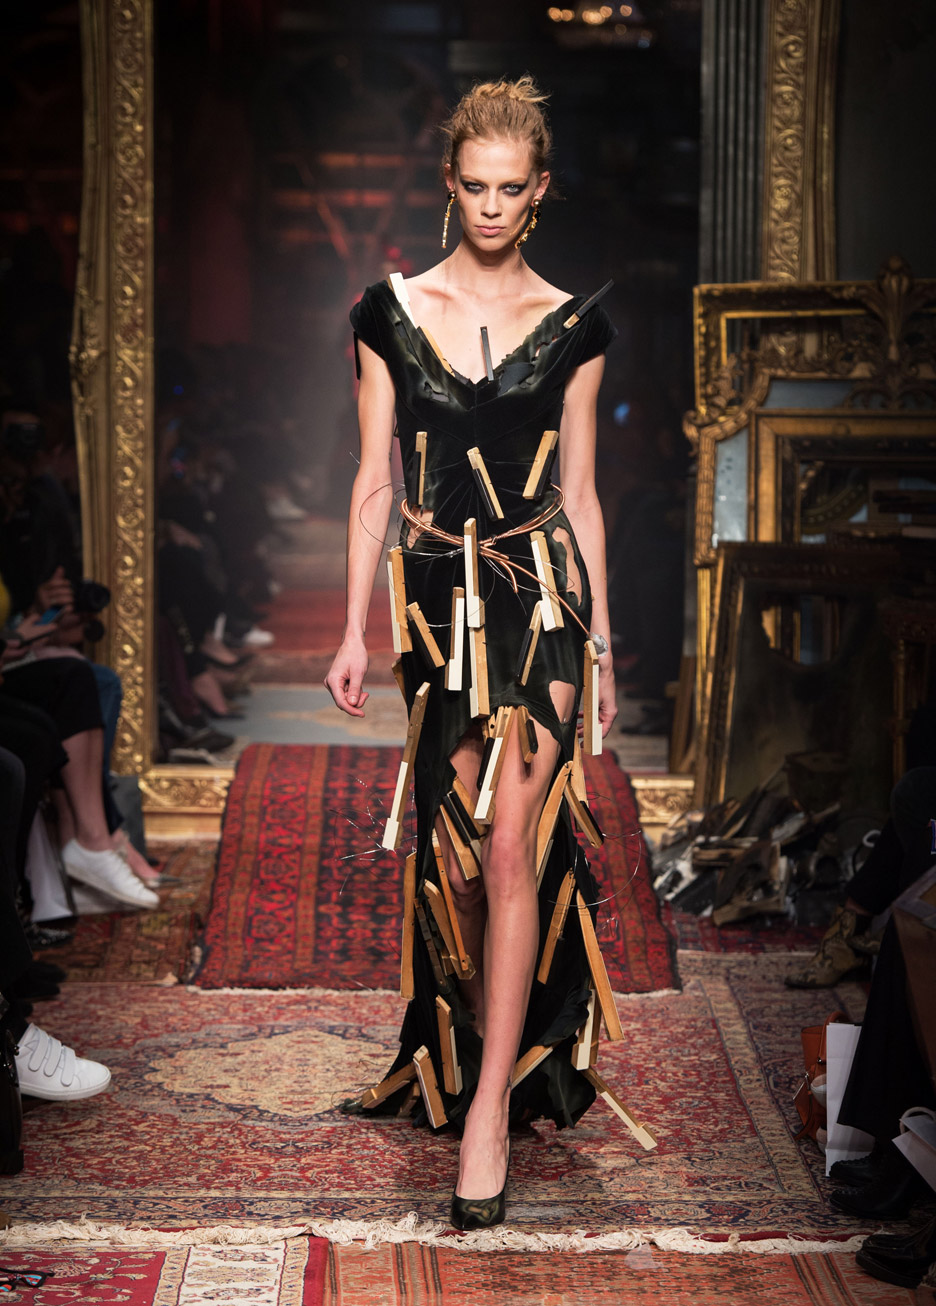 Chandelier dress features in Moschino's singed AW16 show